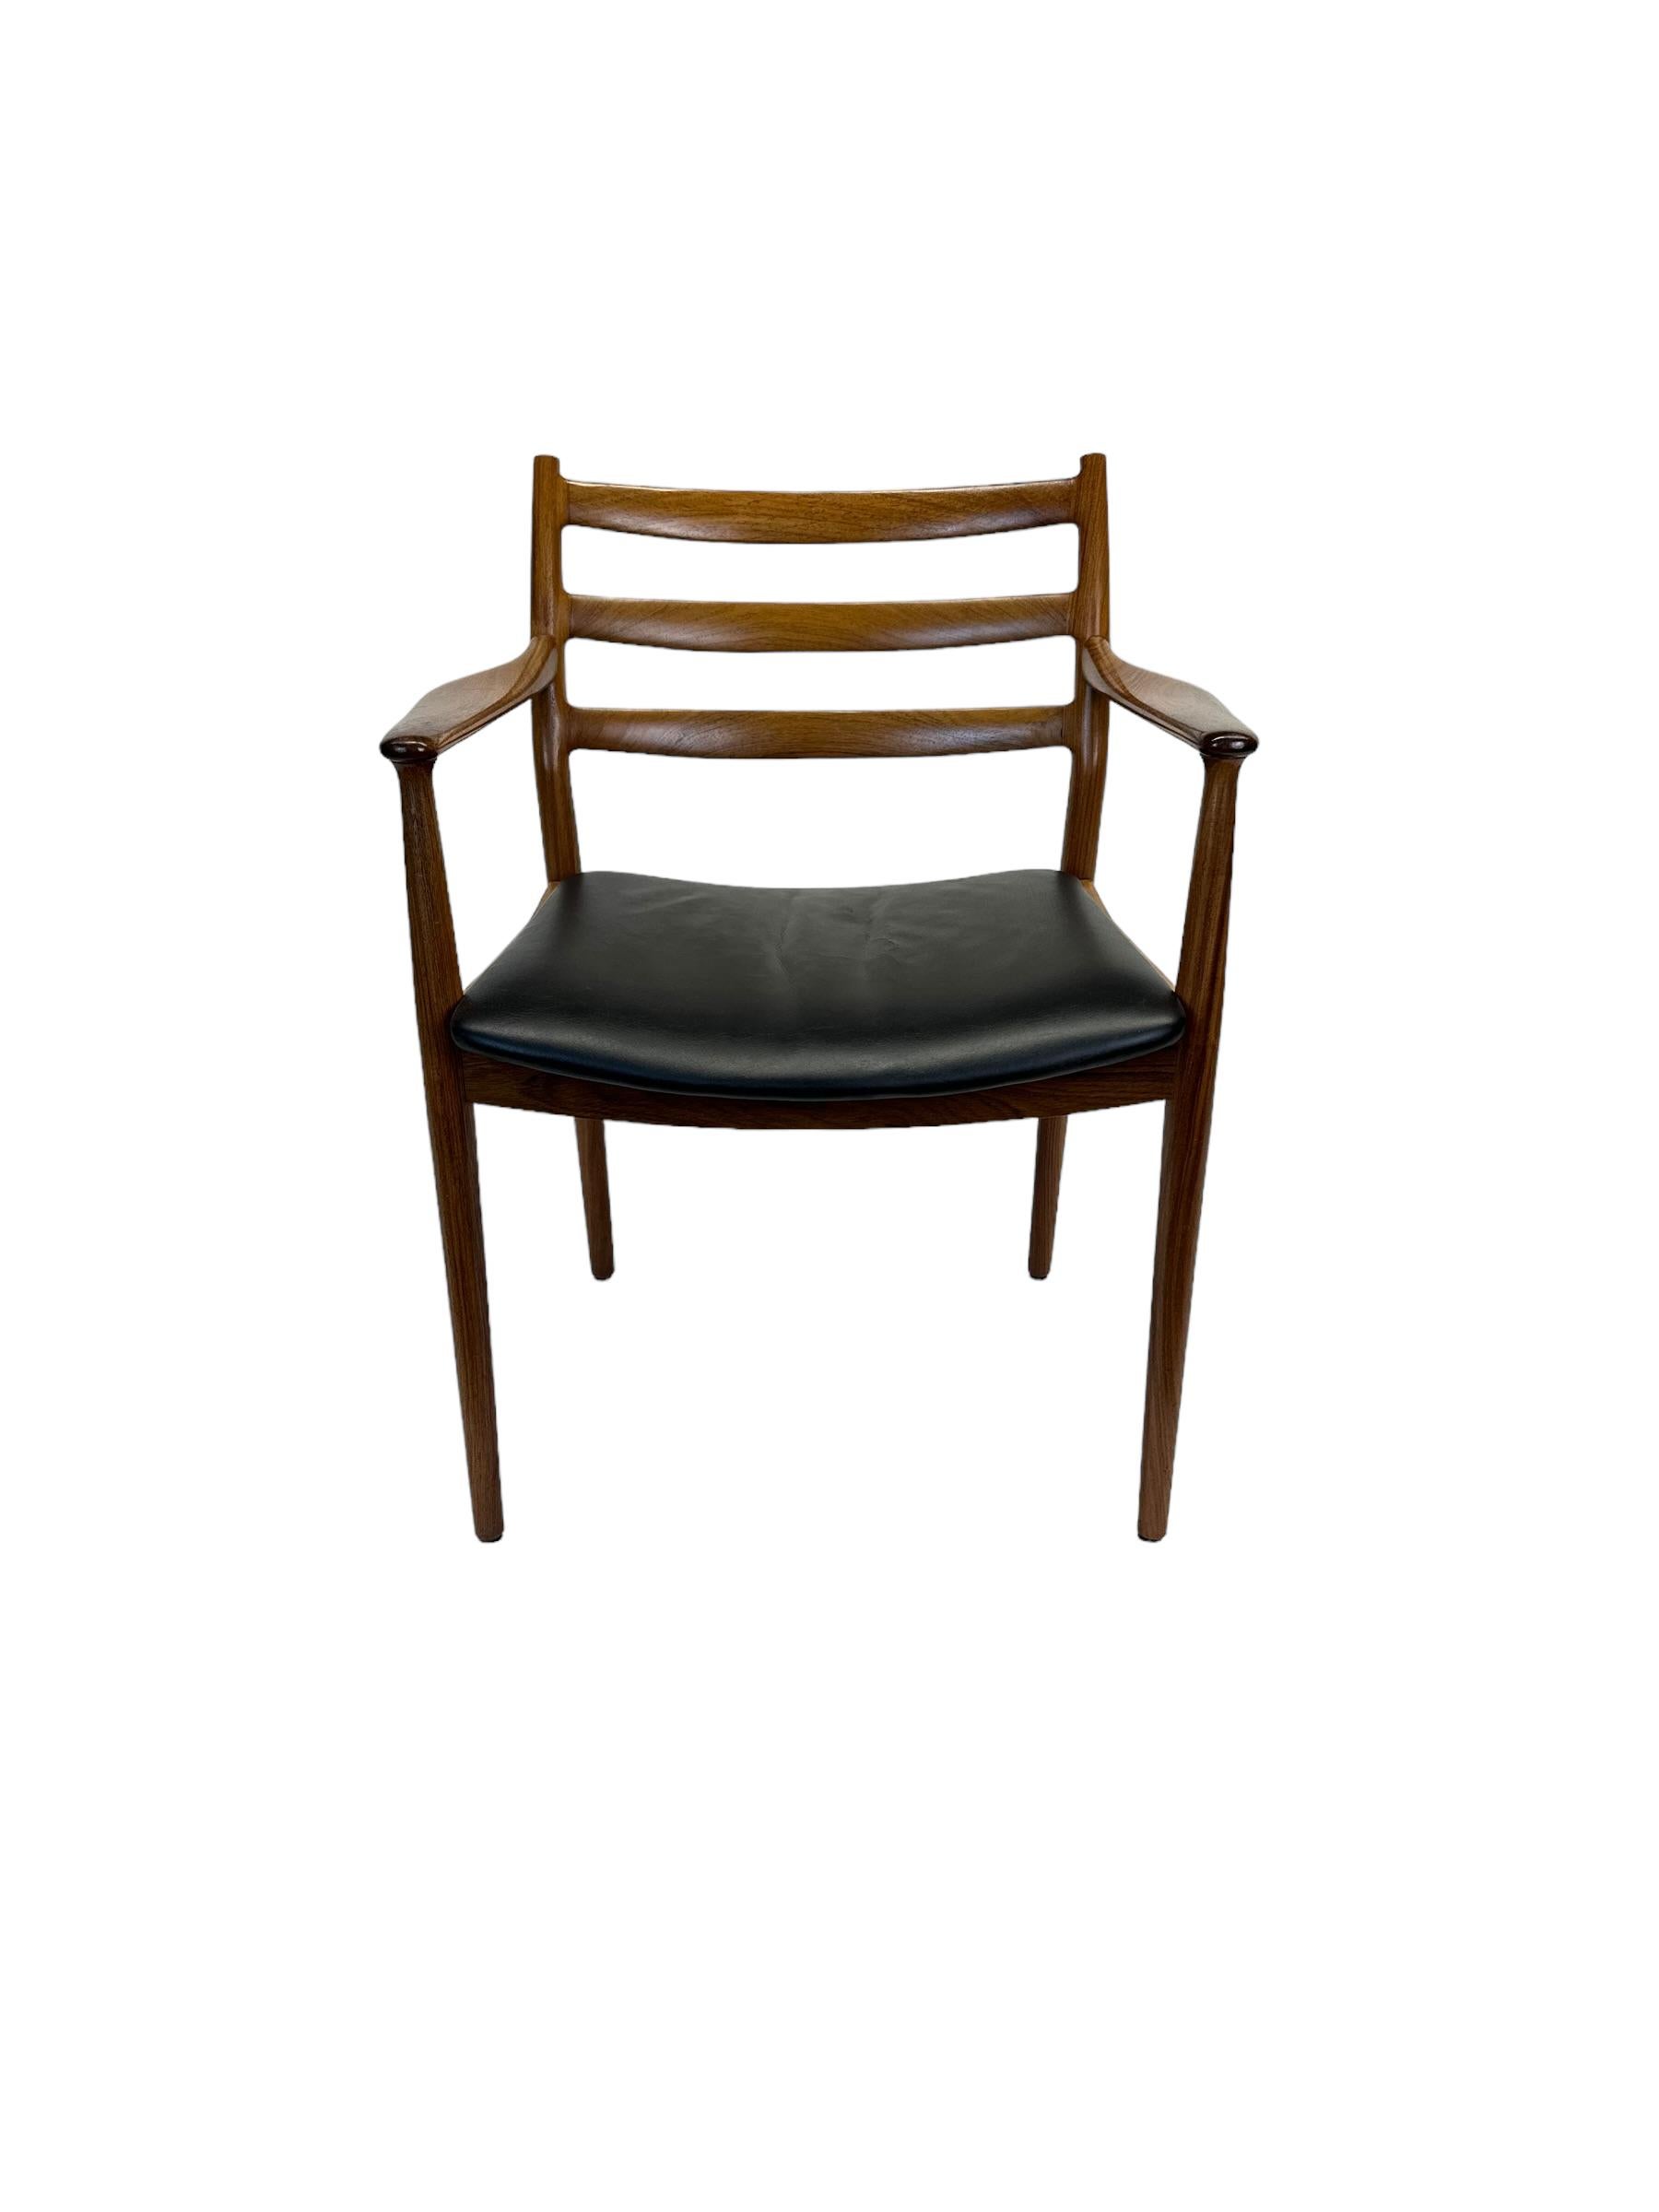 Beautiful solid rosewood ladder back armchair by Arne Vodder. An exemplar of understated yet carefully proportioned Danish modern elegance. In good condition, presenting well for age. Black leather tastefully tuned up but still matches the character